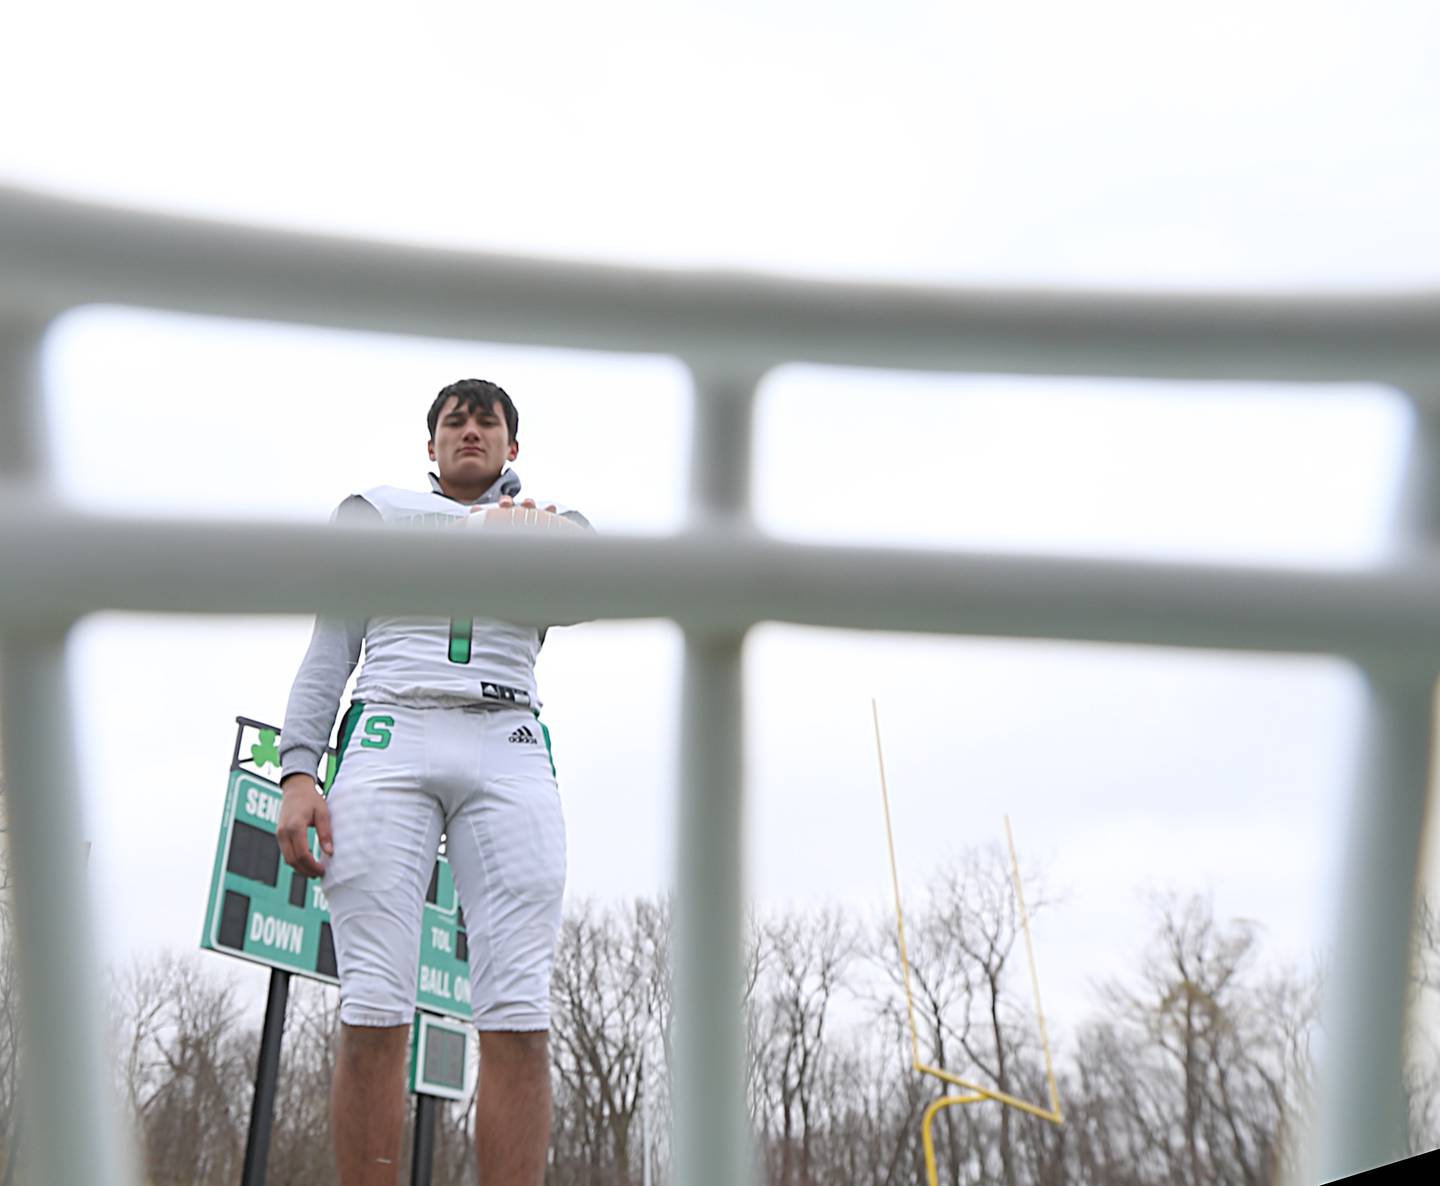 Seneca's Nathan Grant is the Ottawa Times football player of the year.